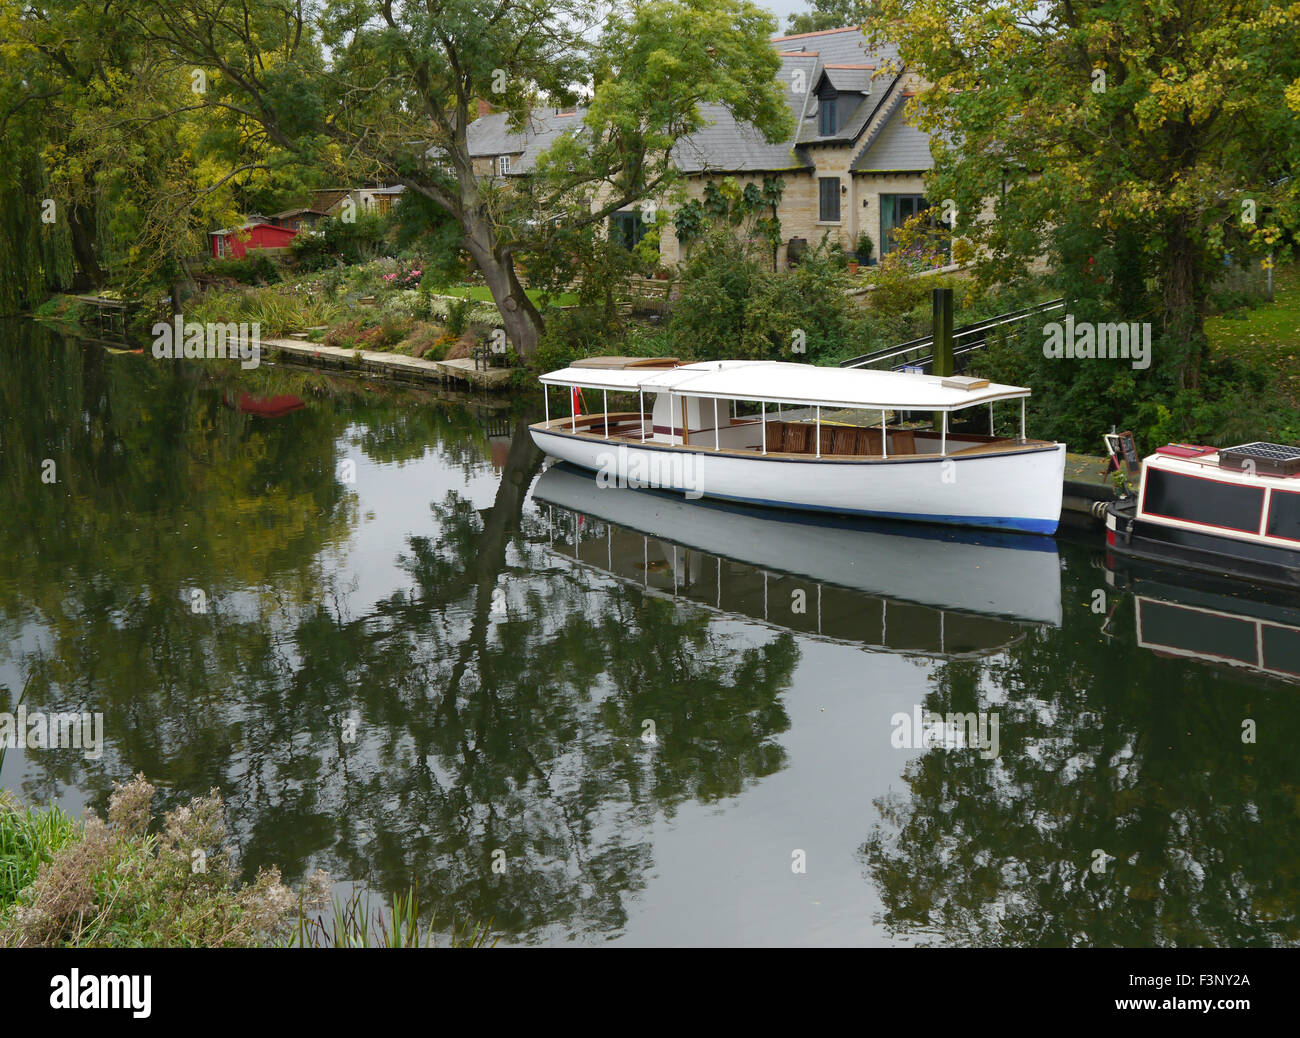 Nene valley river, UK.  October 11th 2015. Cloudy overcast light  reflections of autumn trees and boats in river. Credit: Clifford Norton/Alamy Live News Stock Photo